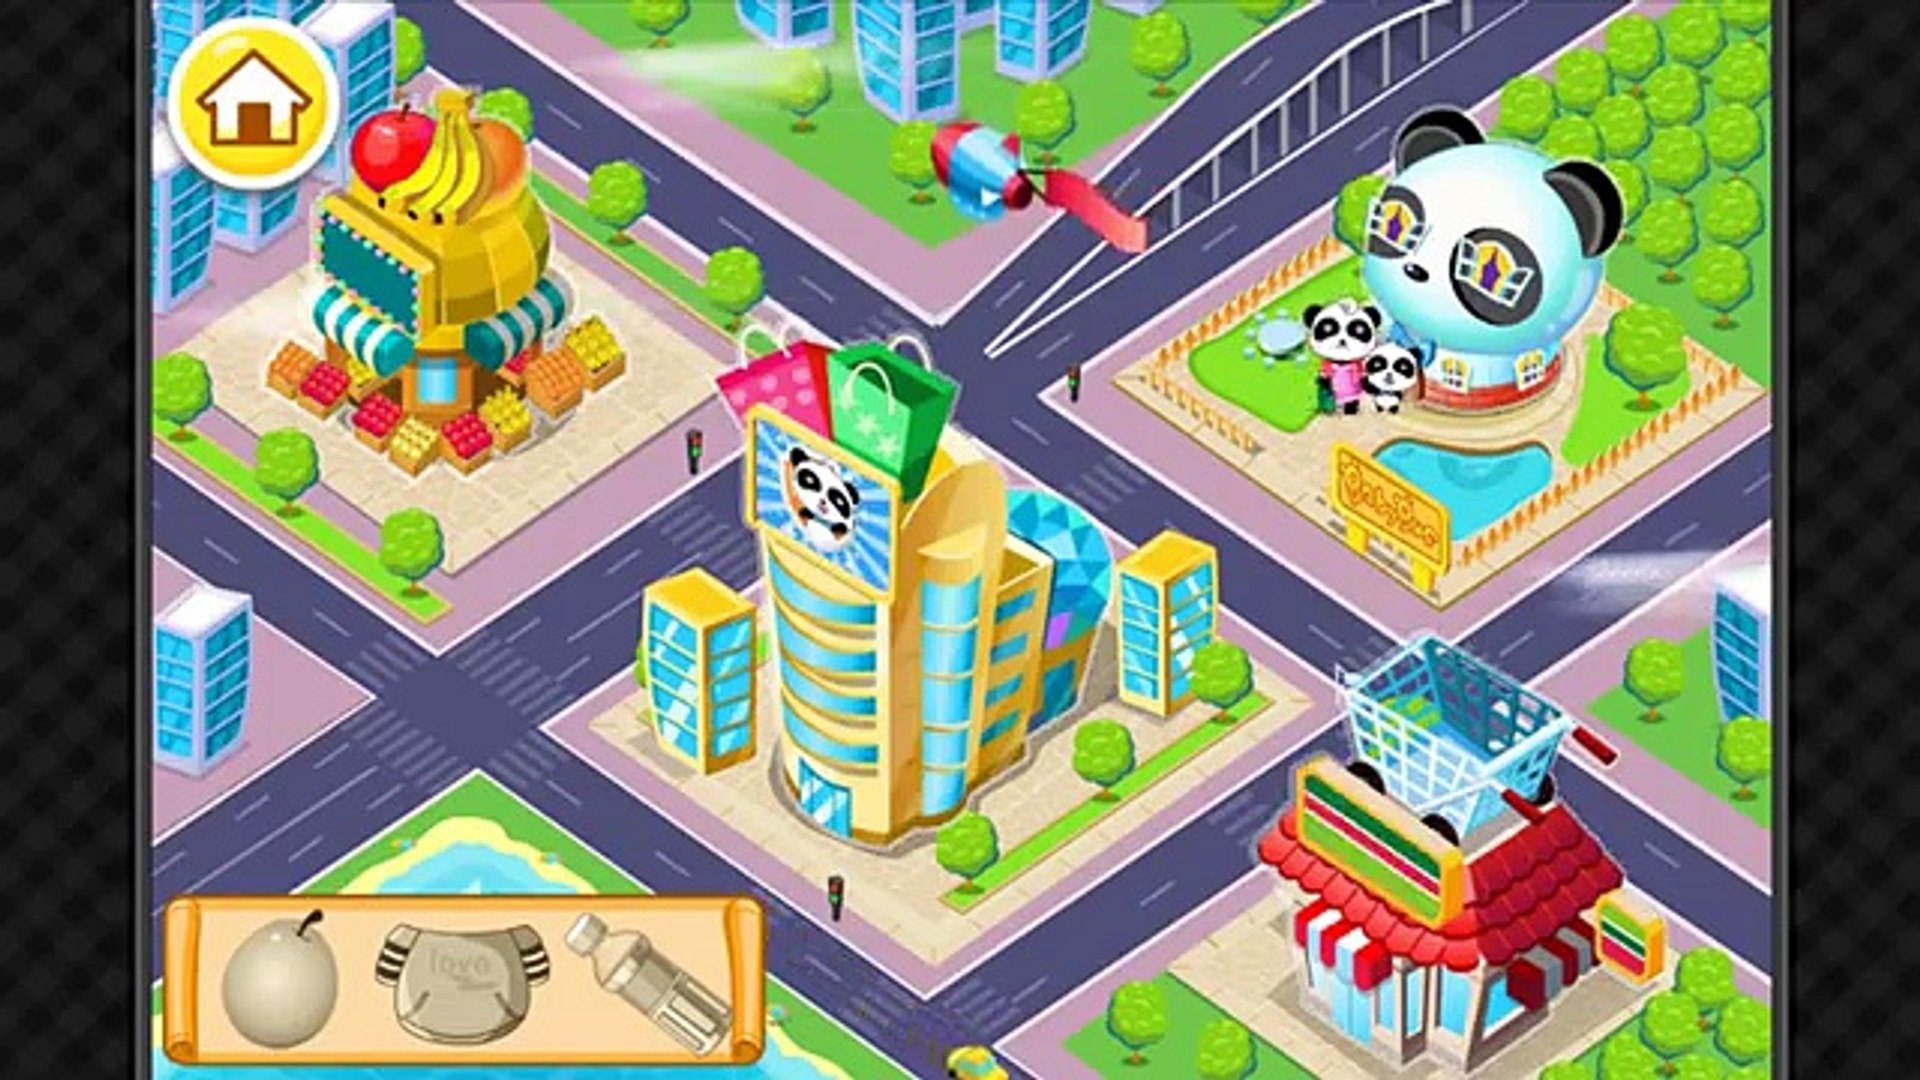 Travel Safety Tips l Kids learn attention to safety l Education Panda game for kids